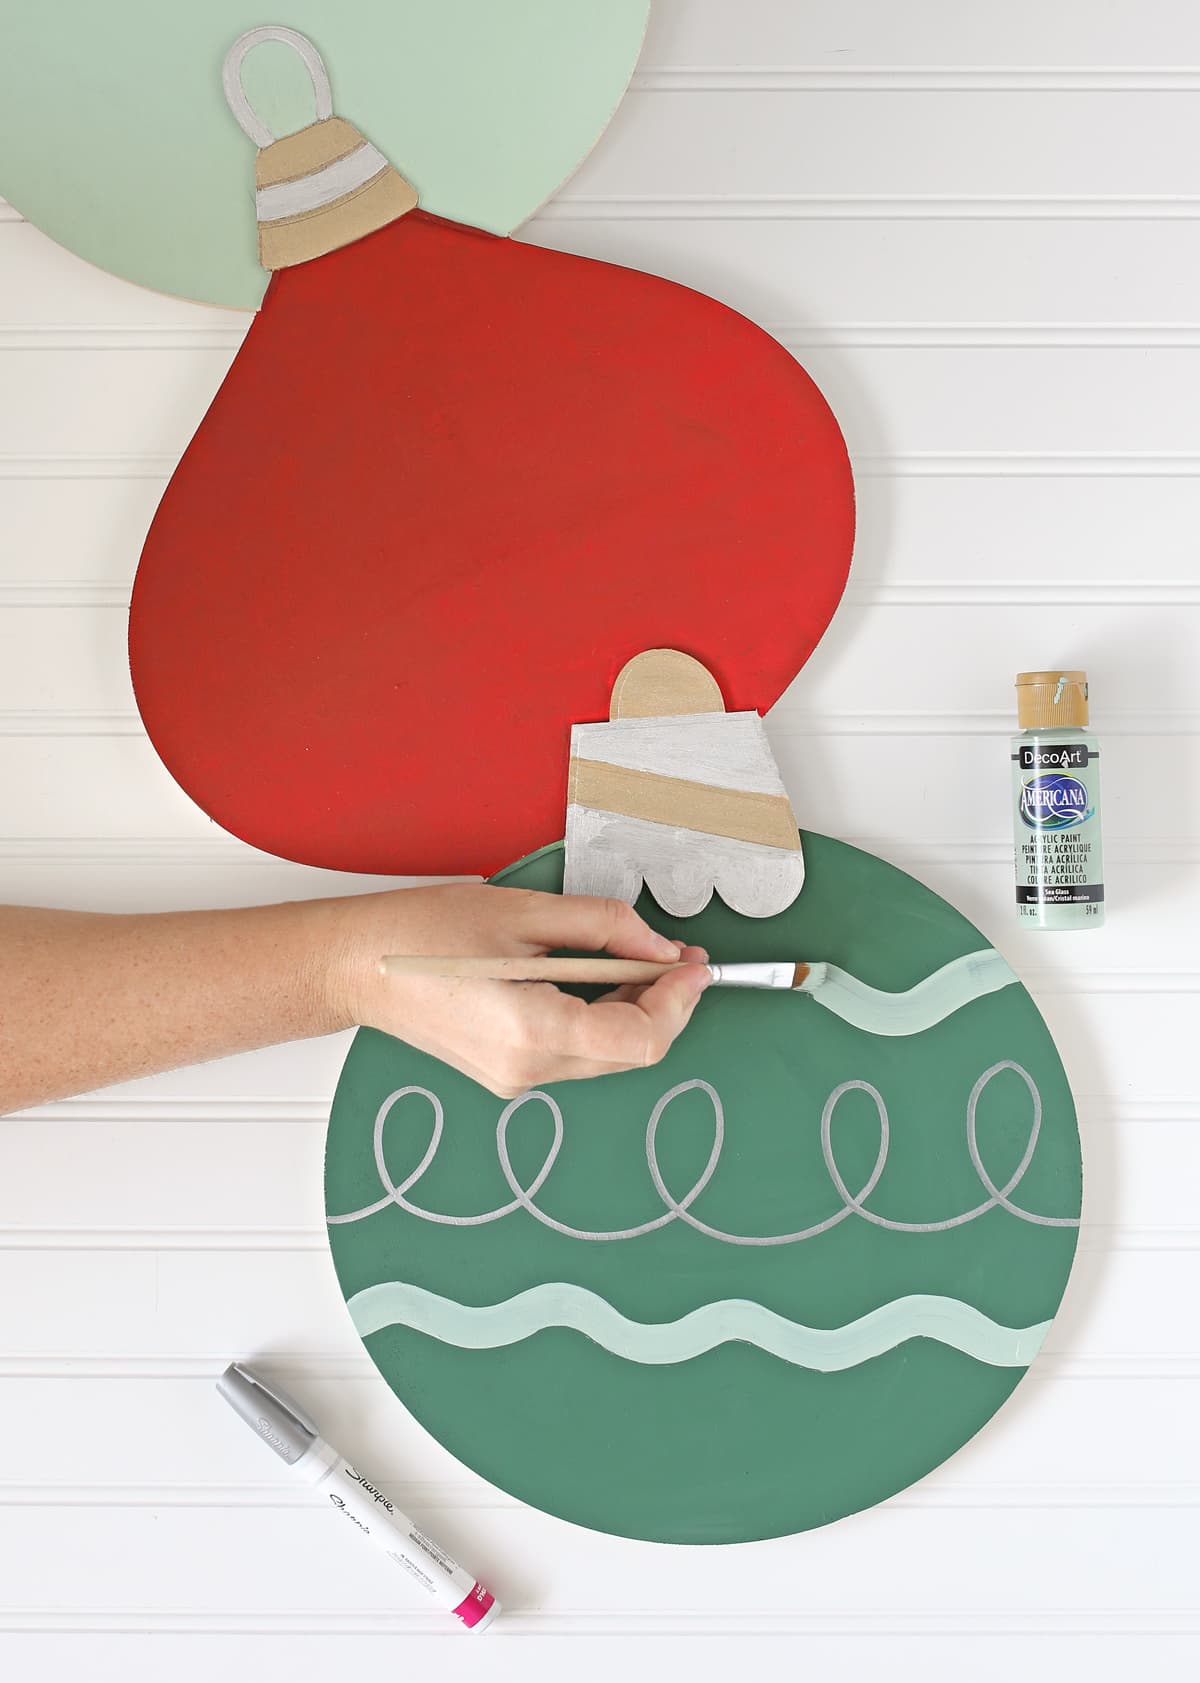 painting designs onto wood a christmas ornament decoration